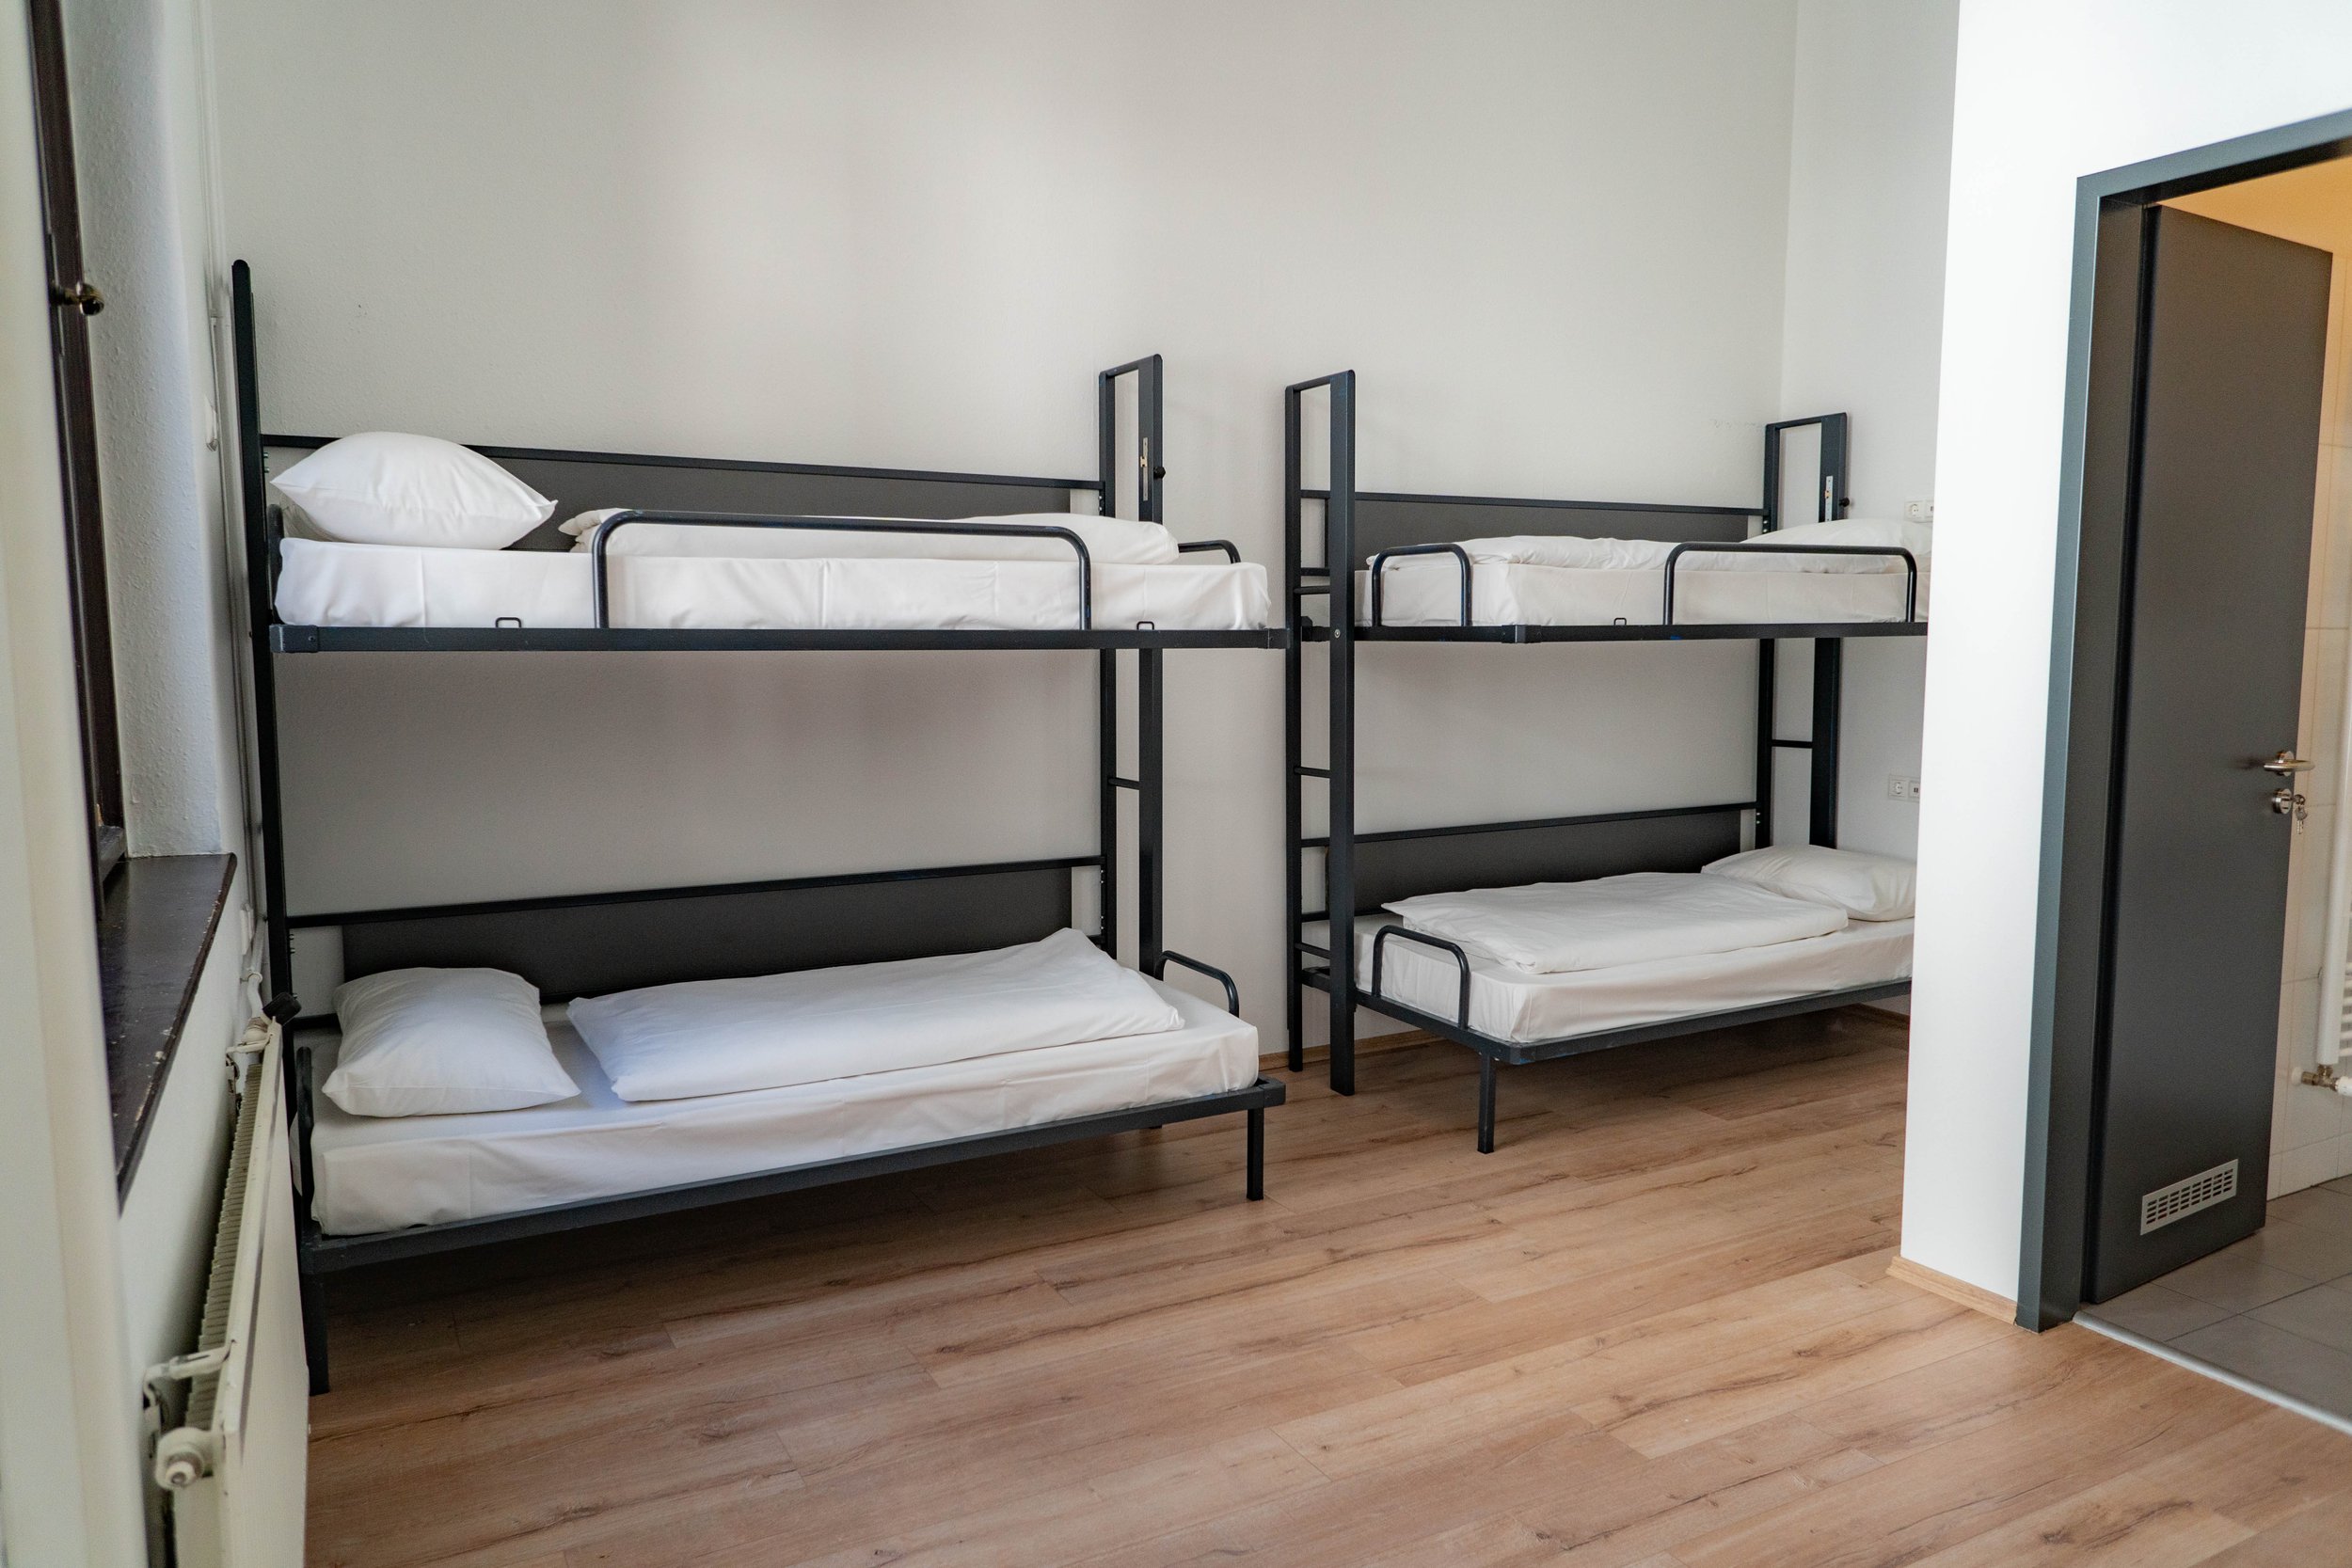 Equity Point Budapest Shared Room Dorm Bunk Bed 1.jpg